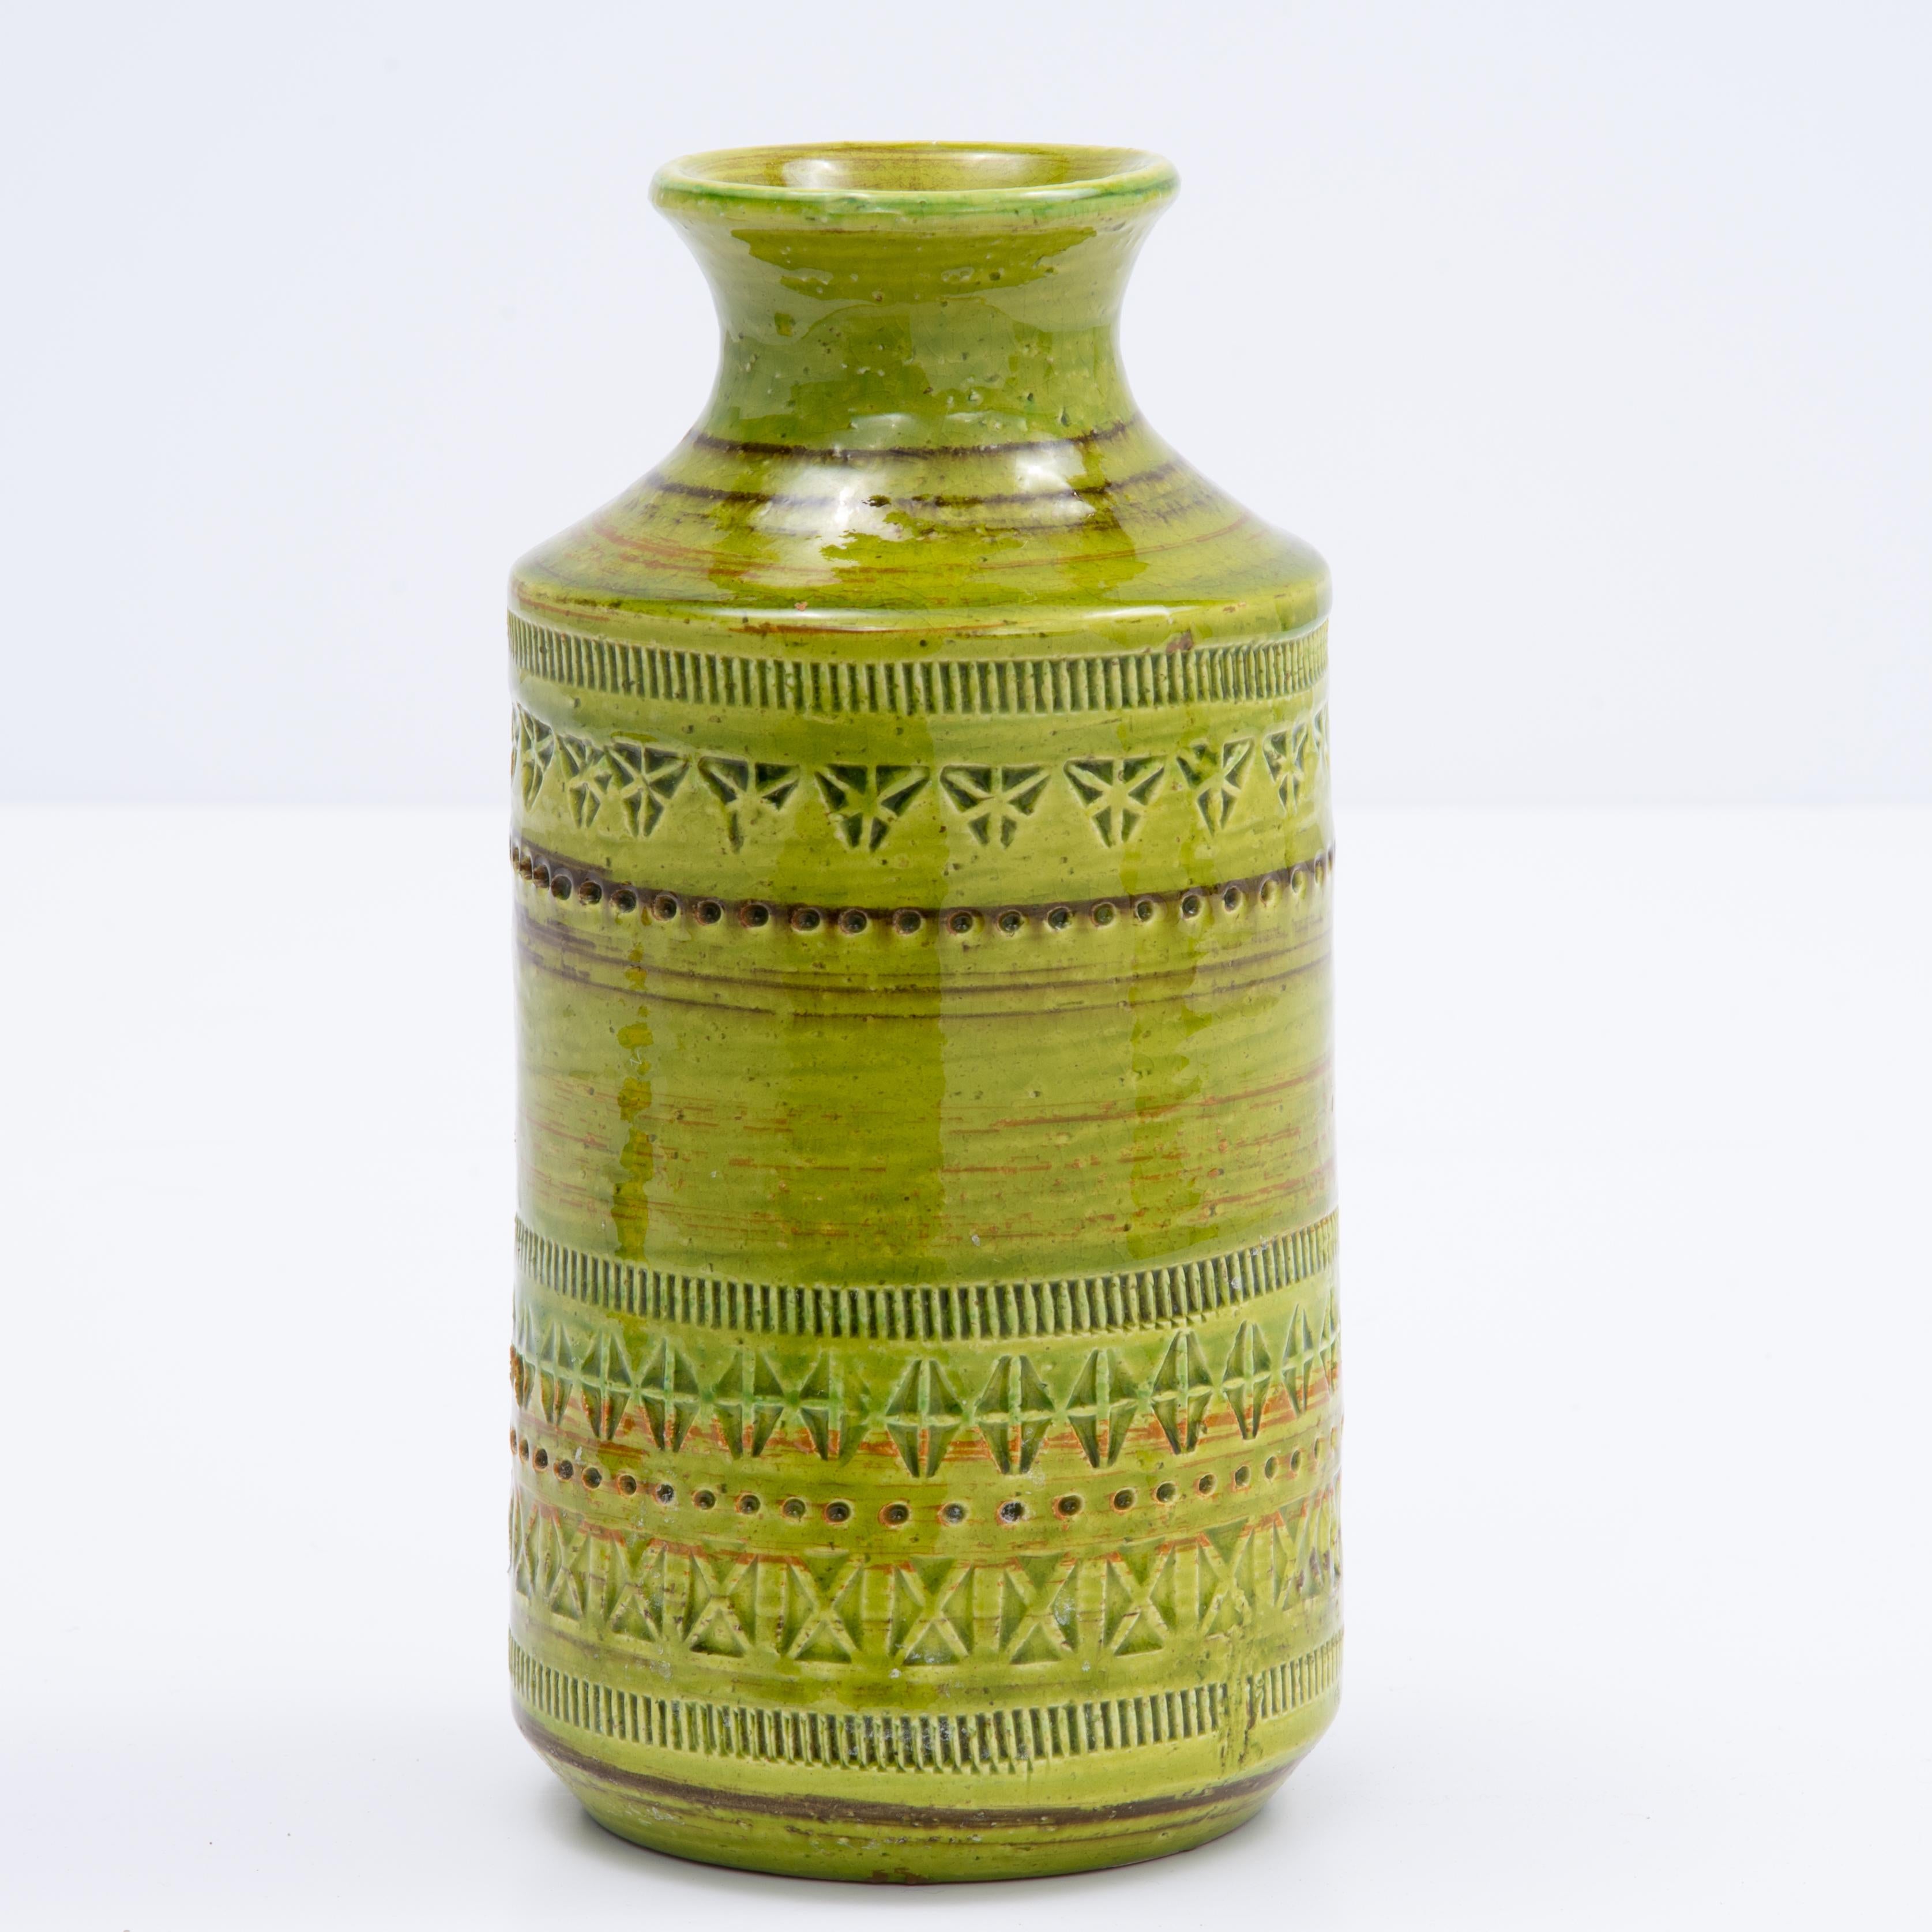 Green Aldo Londi Bitossi Rosenthal Netter Incised Vase In Good Condition For Sale In Forest Grove, PA